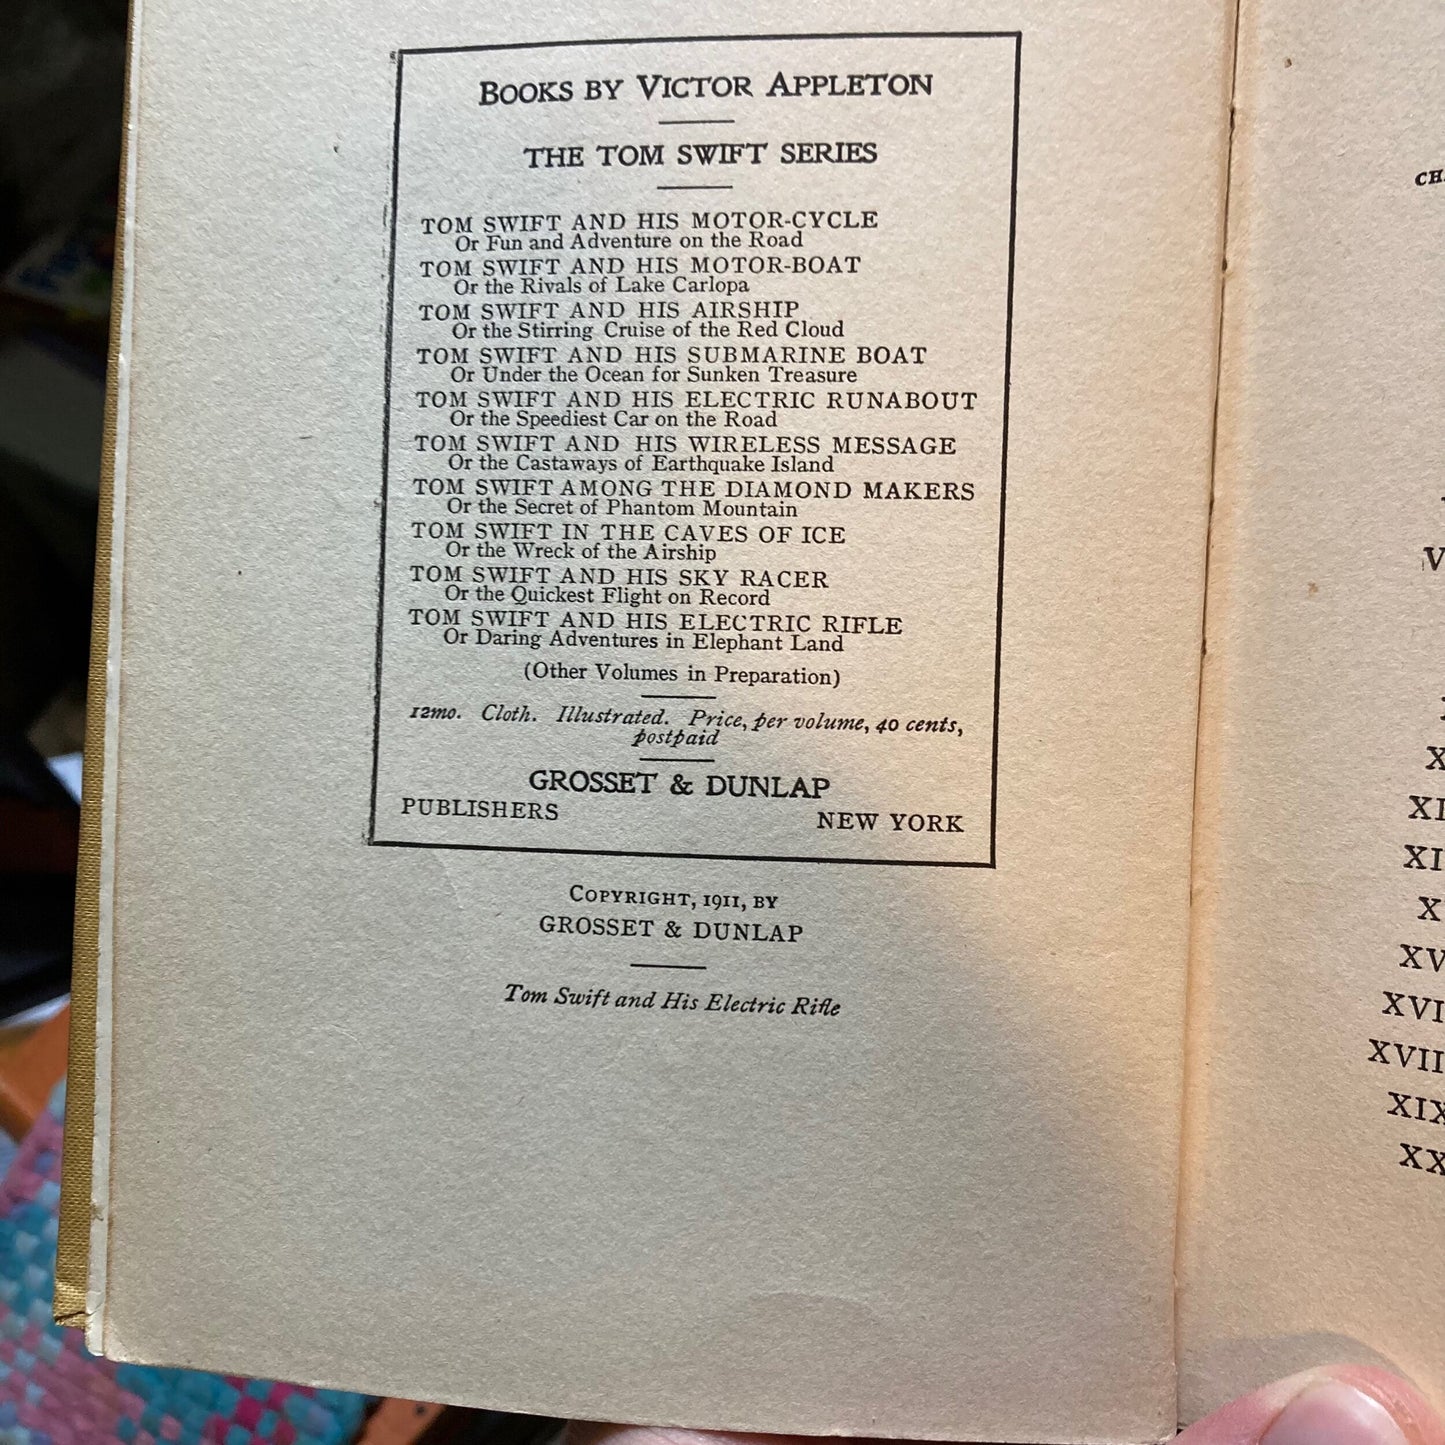 APPLETON, Victor “Tom Swift and His Electric Rifle” [Grosset & Dunlap, 1911] - Buzz Bookstore